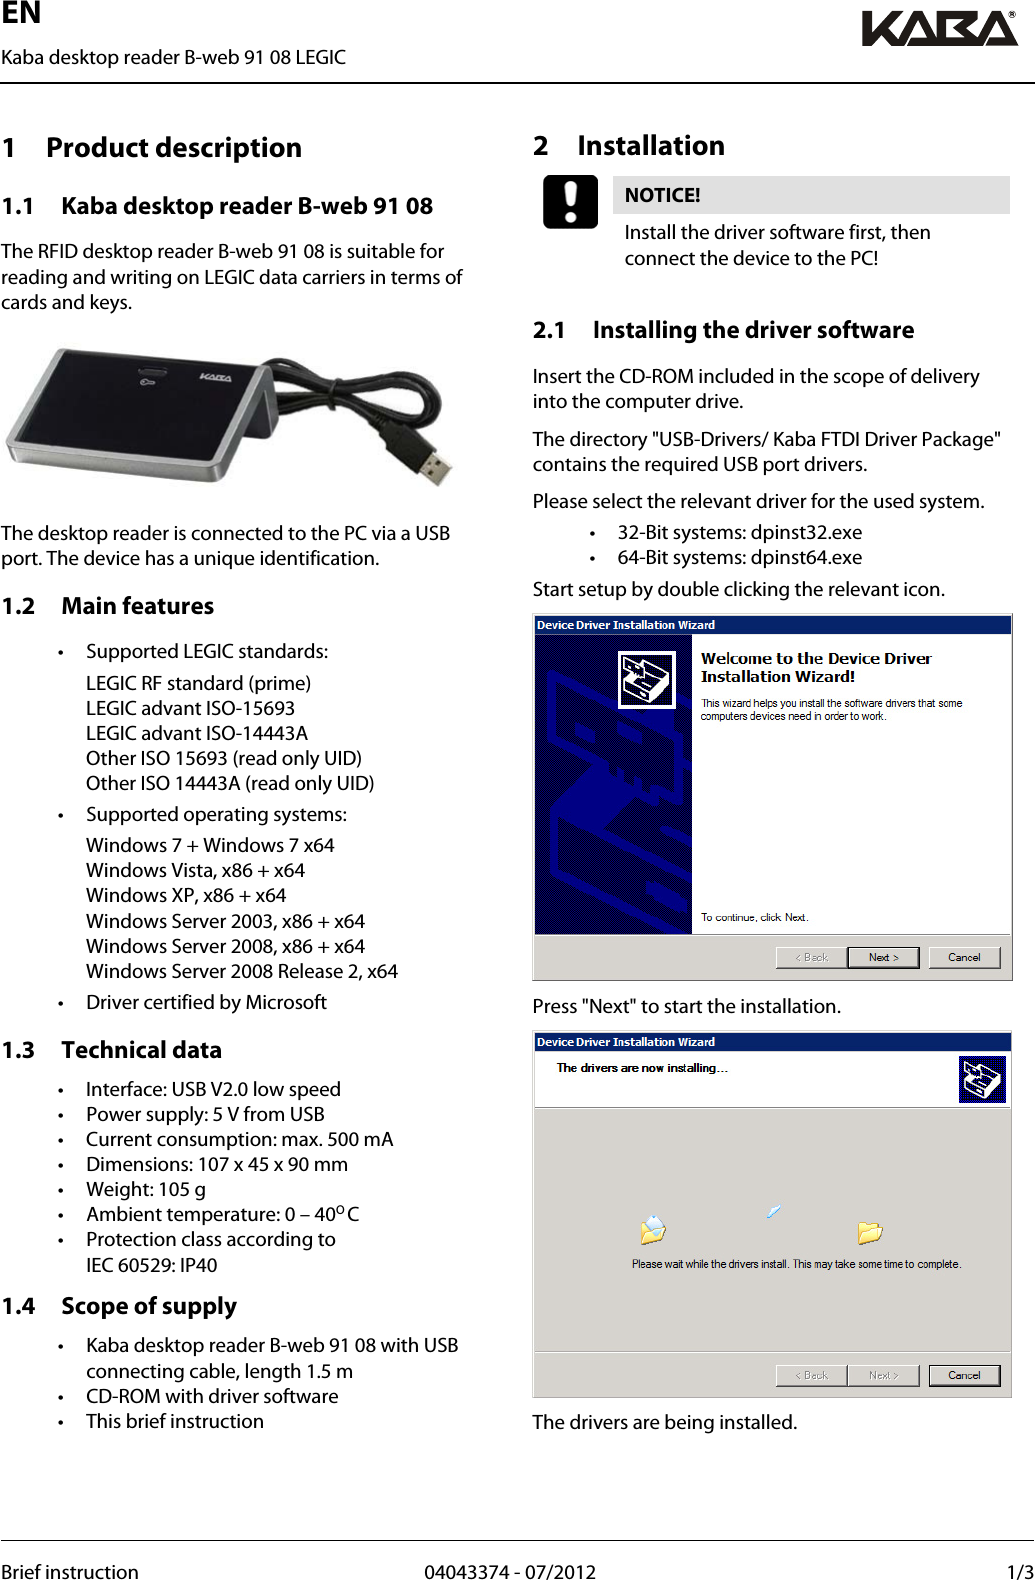 EN Kaba desktop reader B-web 91 08 LEGIC  Brief instruction  04043374 - 07/2012  1/3     1 Product description 1.1 Kaba desktop reader B-web 91 08 The RFID desktop reader B-web 91 08 is suitable for reading and writing on LEGIC data carriers in terms of cards and keys.  The desktop reader is connected to the PC via a USB port. The device has a unique identification. 1.2 Main features •  Supported LEGIC standards:  LEGIC RF standard (prime) LEGIC advant ISO-15693 LEGIC advant ISO-14443A Other ISO 15693 (read only UID) Other ISO 14443A (read only UID) •  Supported operating systems:   Windows 7 + Windows 7 x64 Windows Vista, x86 + x64 Windows XP, x86 + x64 Windows Server 2003, x86 + x64 Windows Server 2008, x86 + x64 Windows Server 2008 Release 2, x64 •  Driver certified by Microsoft 1.3 Technical data •  Interface: USB V2.0 low speed •  Power supply: 5 V from USB •  Current consumption: max. 500 mA •  Dimensions: 107 x 45 x 90 mm •  Weight: 105 g •  Ambient temperature: 0 – 40O C •  Protection class according to  IEC 60529: IP40 1.4 Scope of supply •  Kaba desktop reader B-web 91 08 with USB connecting cable, length 1.5 m •  CD-ROM with driver software •  This brief instruction   2 Installation NOTICE!  Install the driver software first, then connect the device to the PC!  2.1 Installing the driver software Insert the CD-ROM included in the scope of delivery into the computer drive. The directory &quot;USB-Drivers/ Kaba FTDI Driver Package&quot; contains the required USB port drivers. Please select the relevant driver for the used system. •  32-Bit systems: dpinst32.exe •  64-Bit systems: dpinst64.exe Start setup by double clicking the relevant icon.  Press &quot;Next&quot; to start the installation.  The drivers are being installed.   